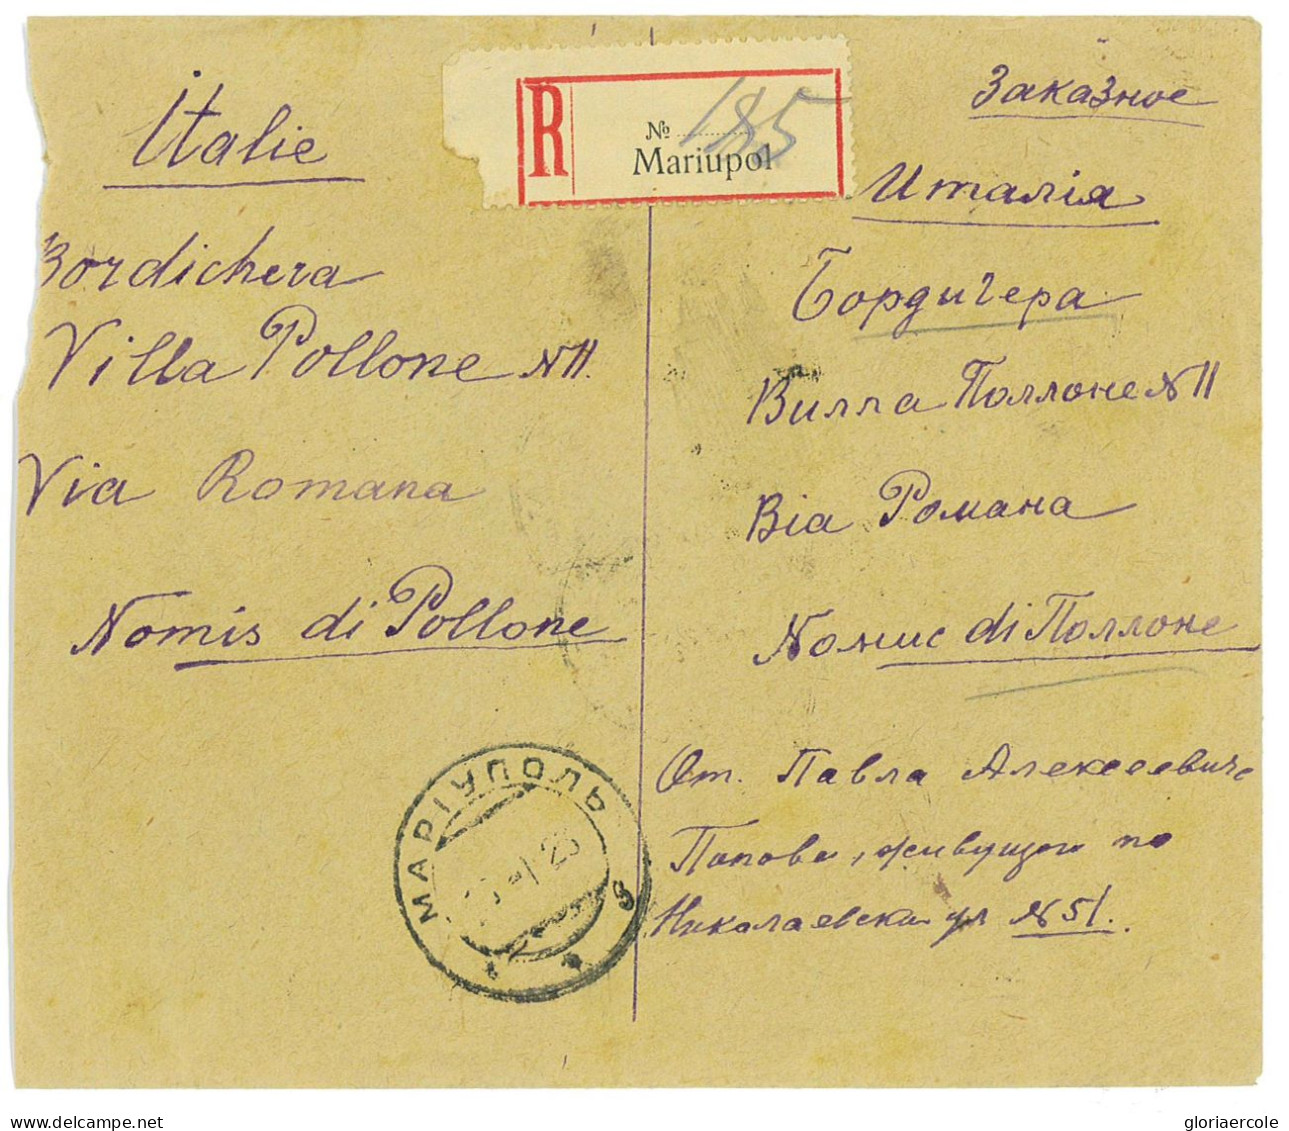 P2912 - RUSSIA , 700 RUBEL LETTER REGISTERED FROM MARIUPOL 1923 TO ITALY - Cartas & Documentos